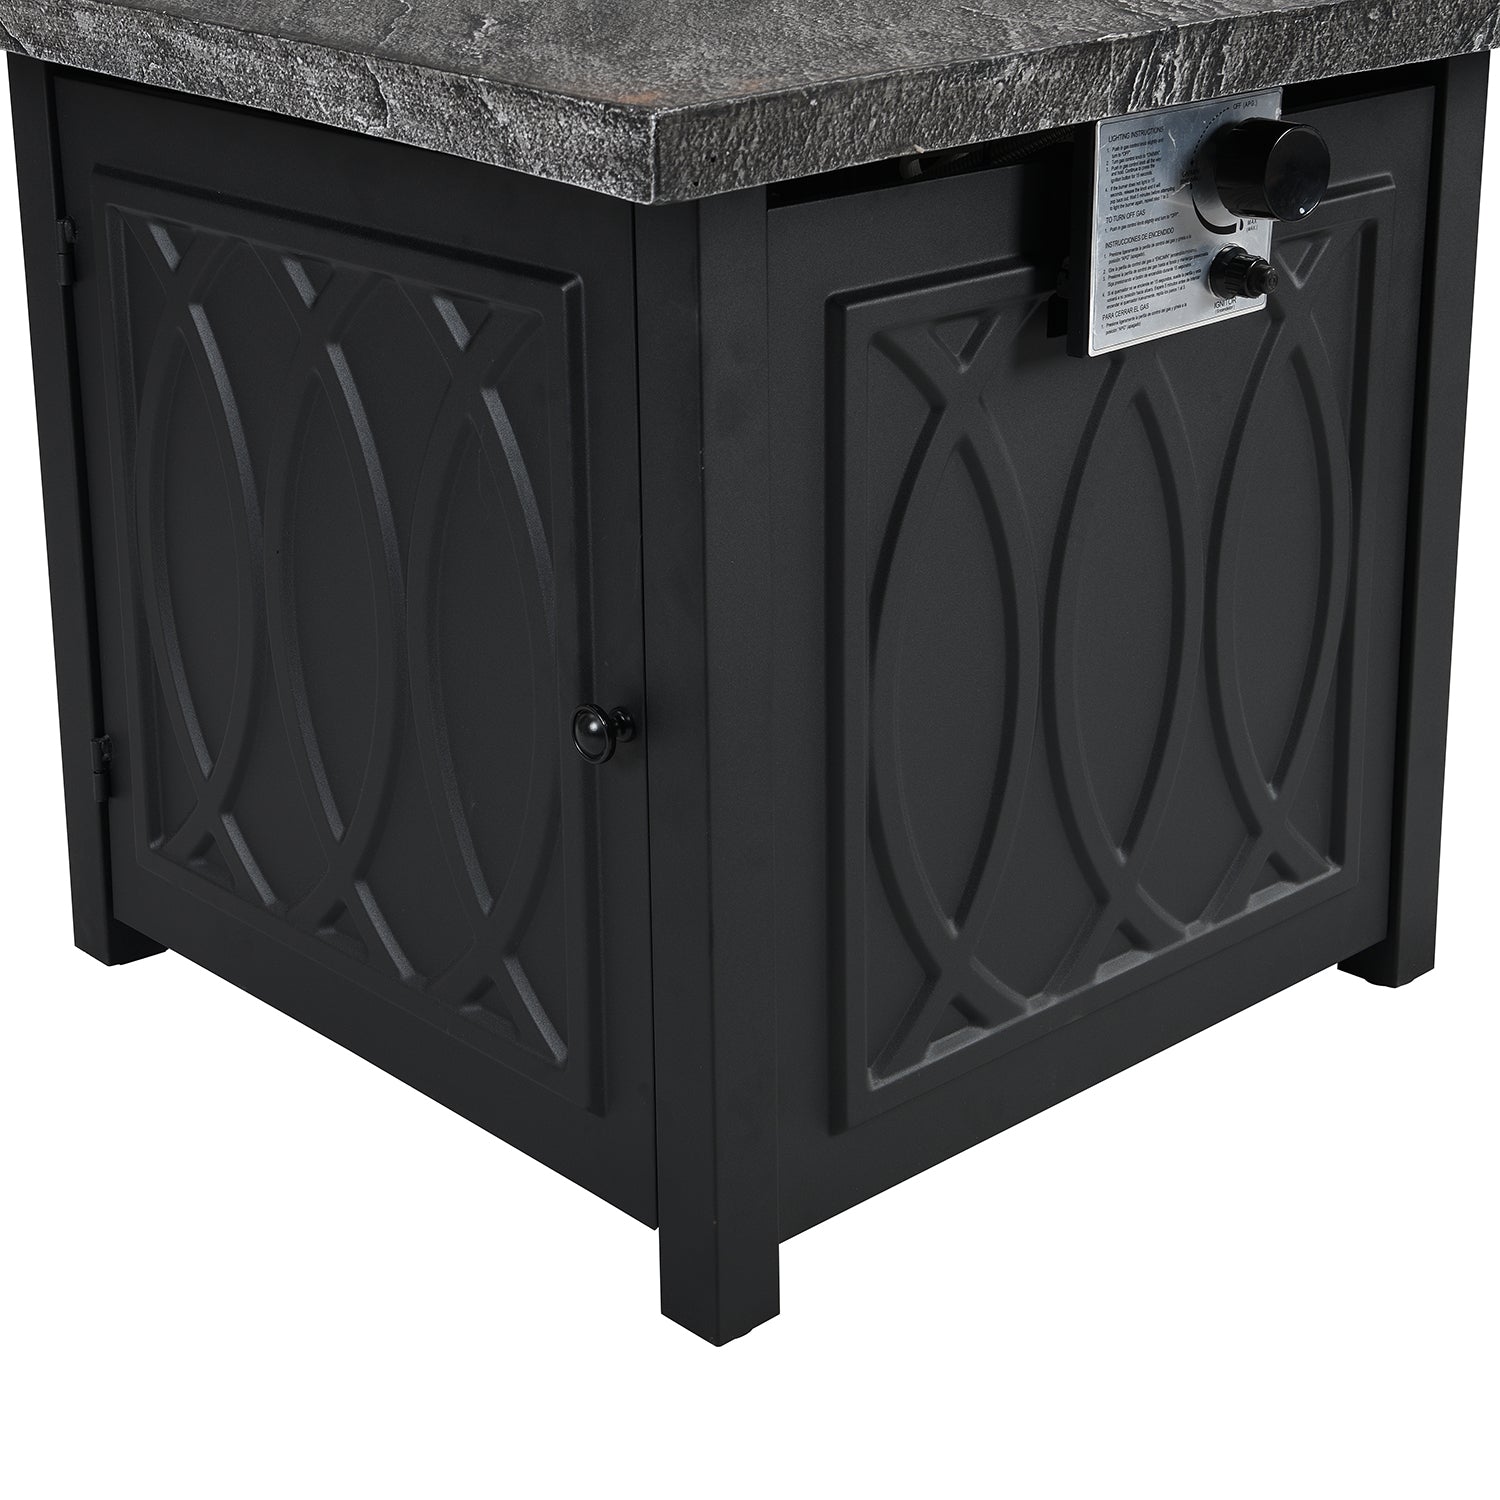 Square Outdoor 32" x 32" 50,000BTUs Real Concrete Gas Firepit Table